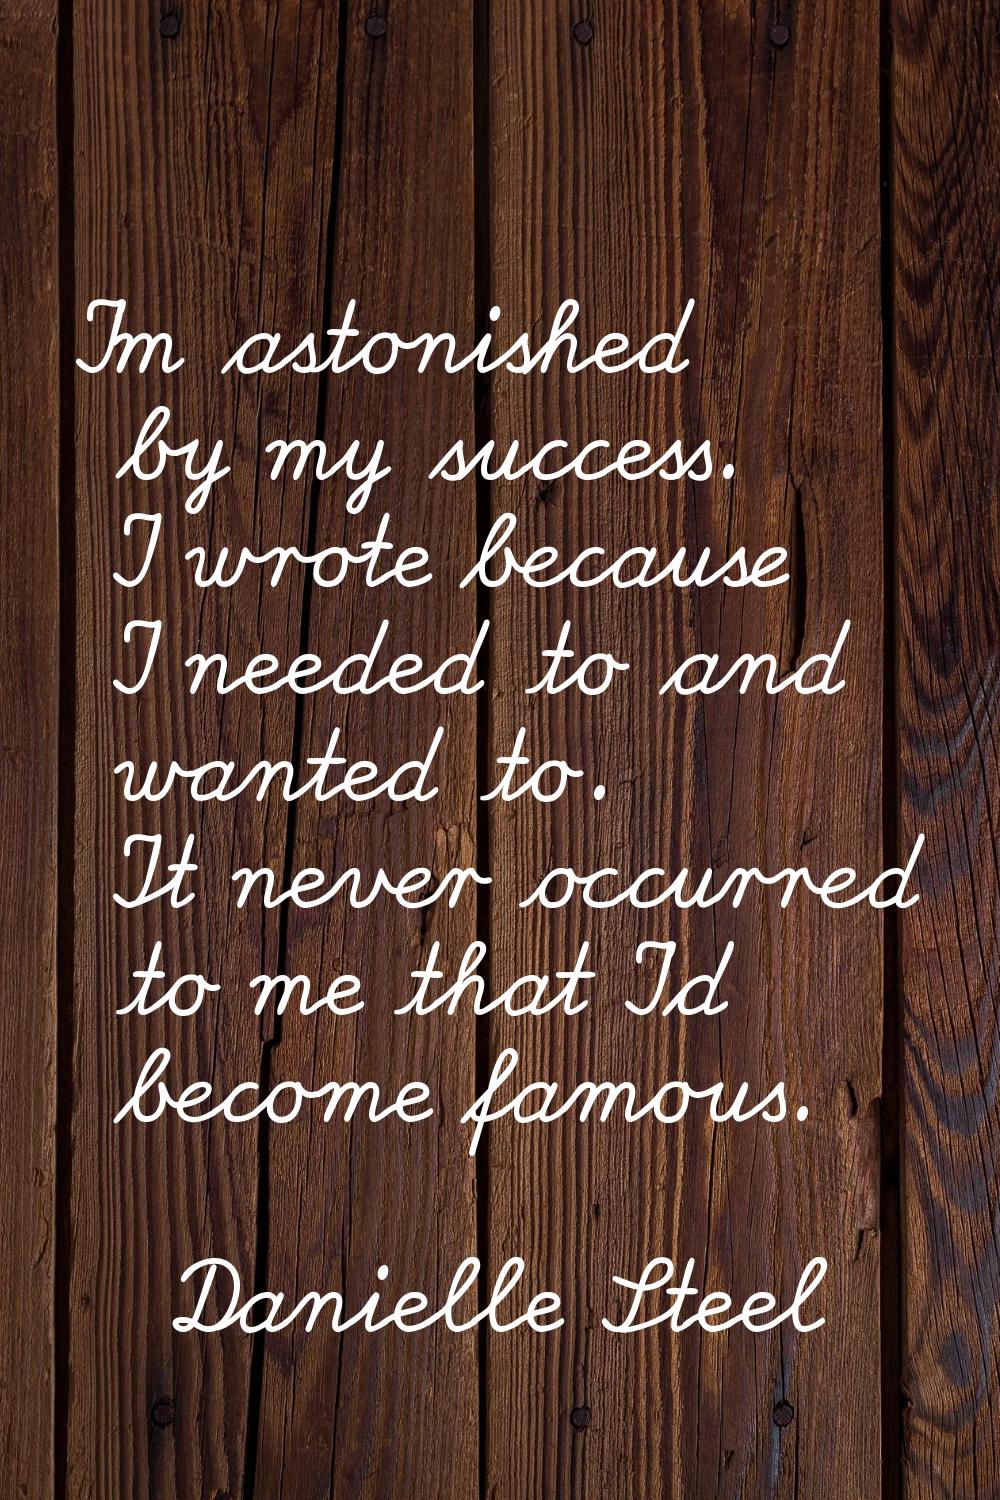 I'm astonished by my success. I wrote because I needed to and wanted to. It never occurred to me th